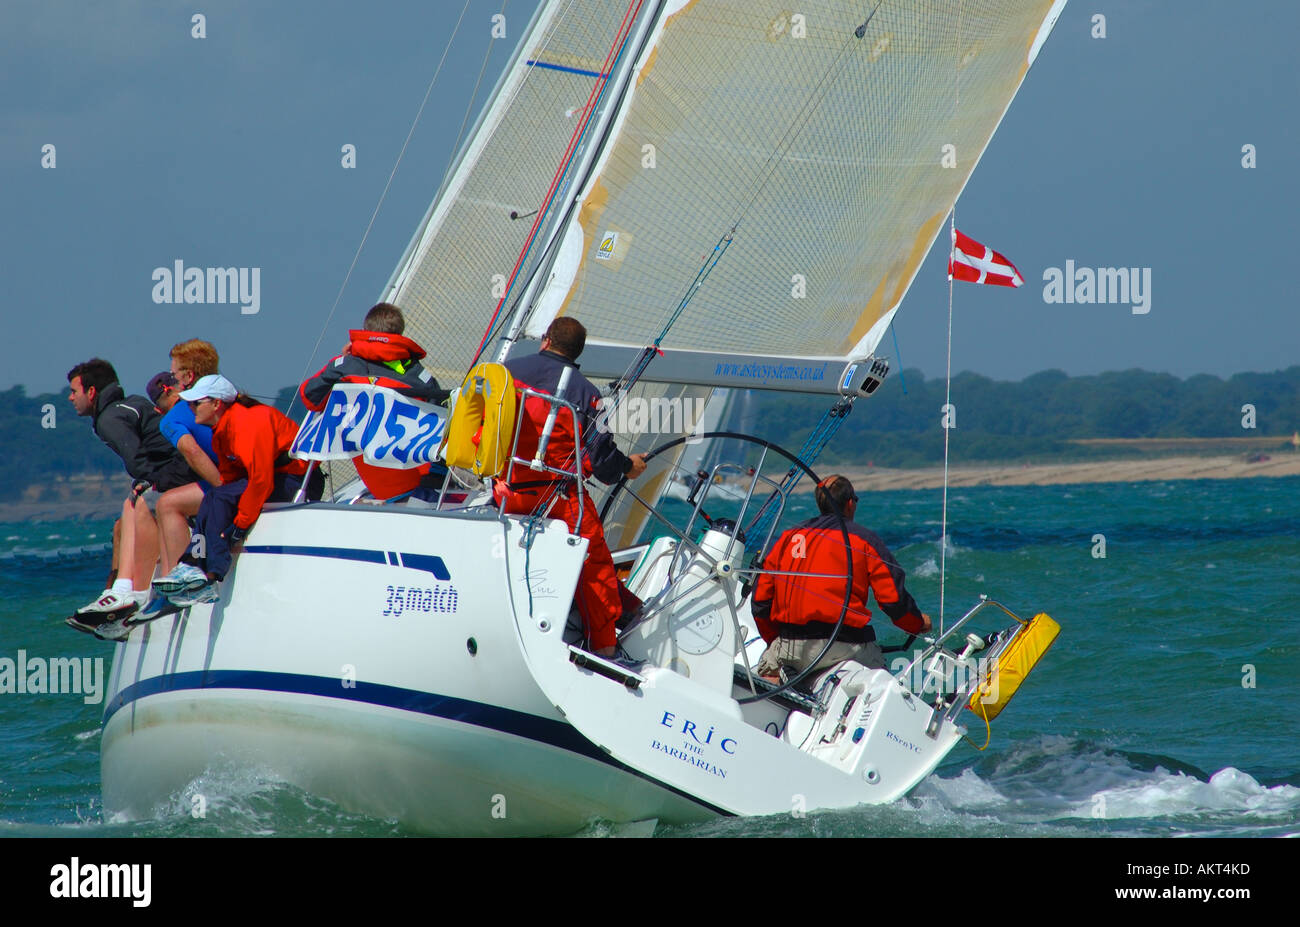 Racing Yacht, Cowes Week, Cowes, Isle of Wight, England, UK, GB. Stock Photo